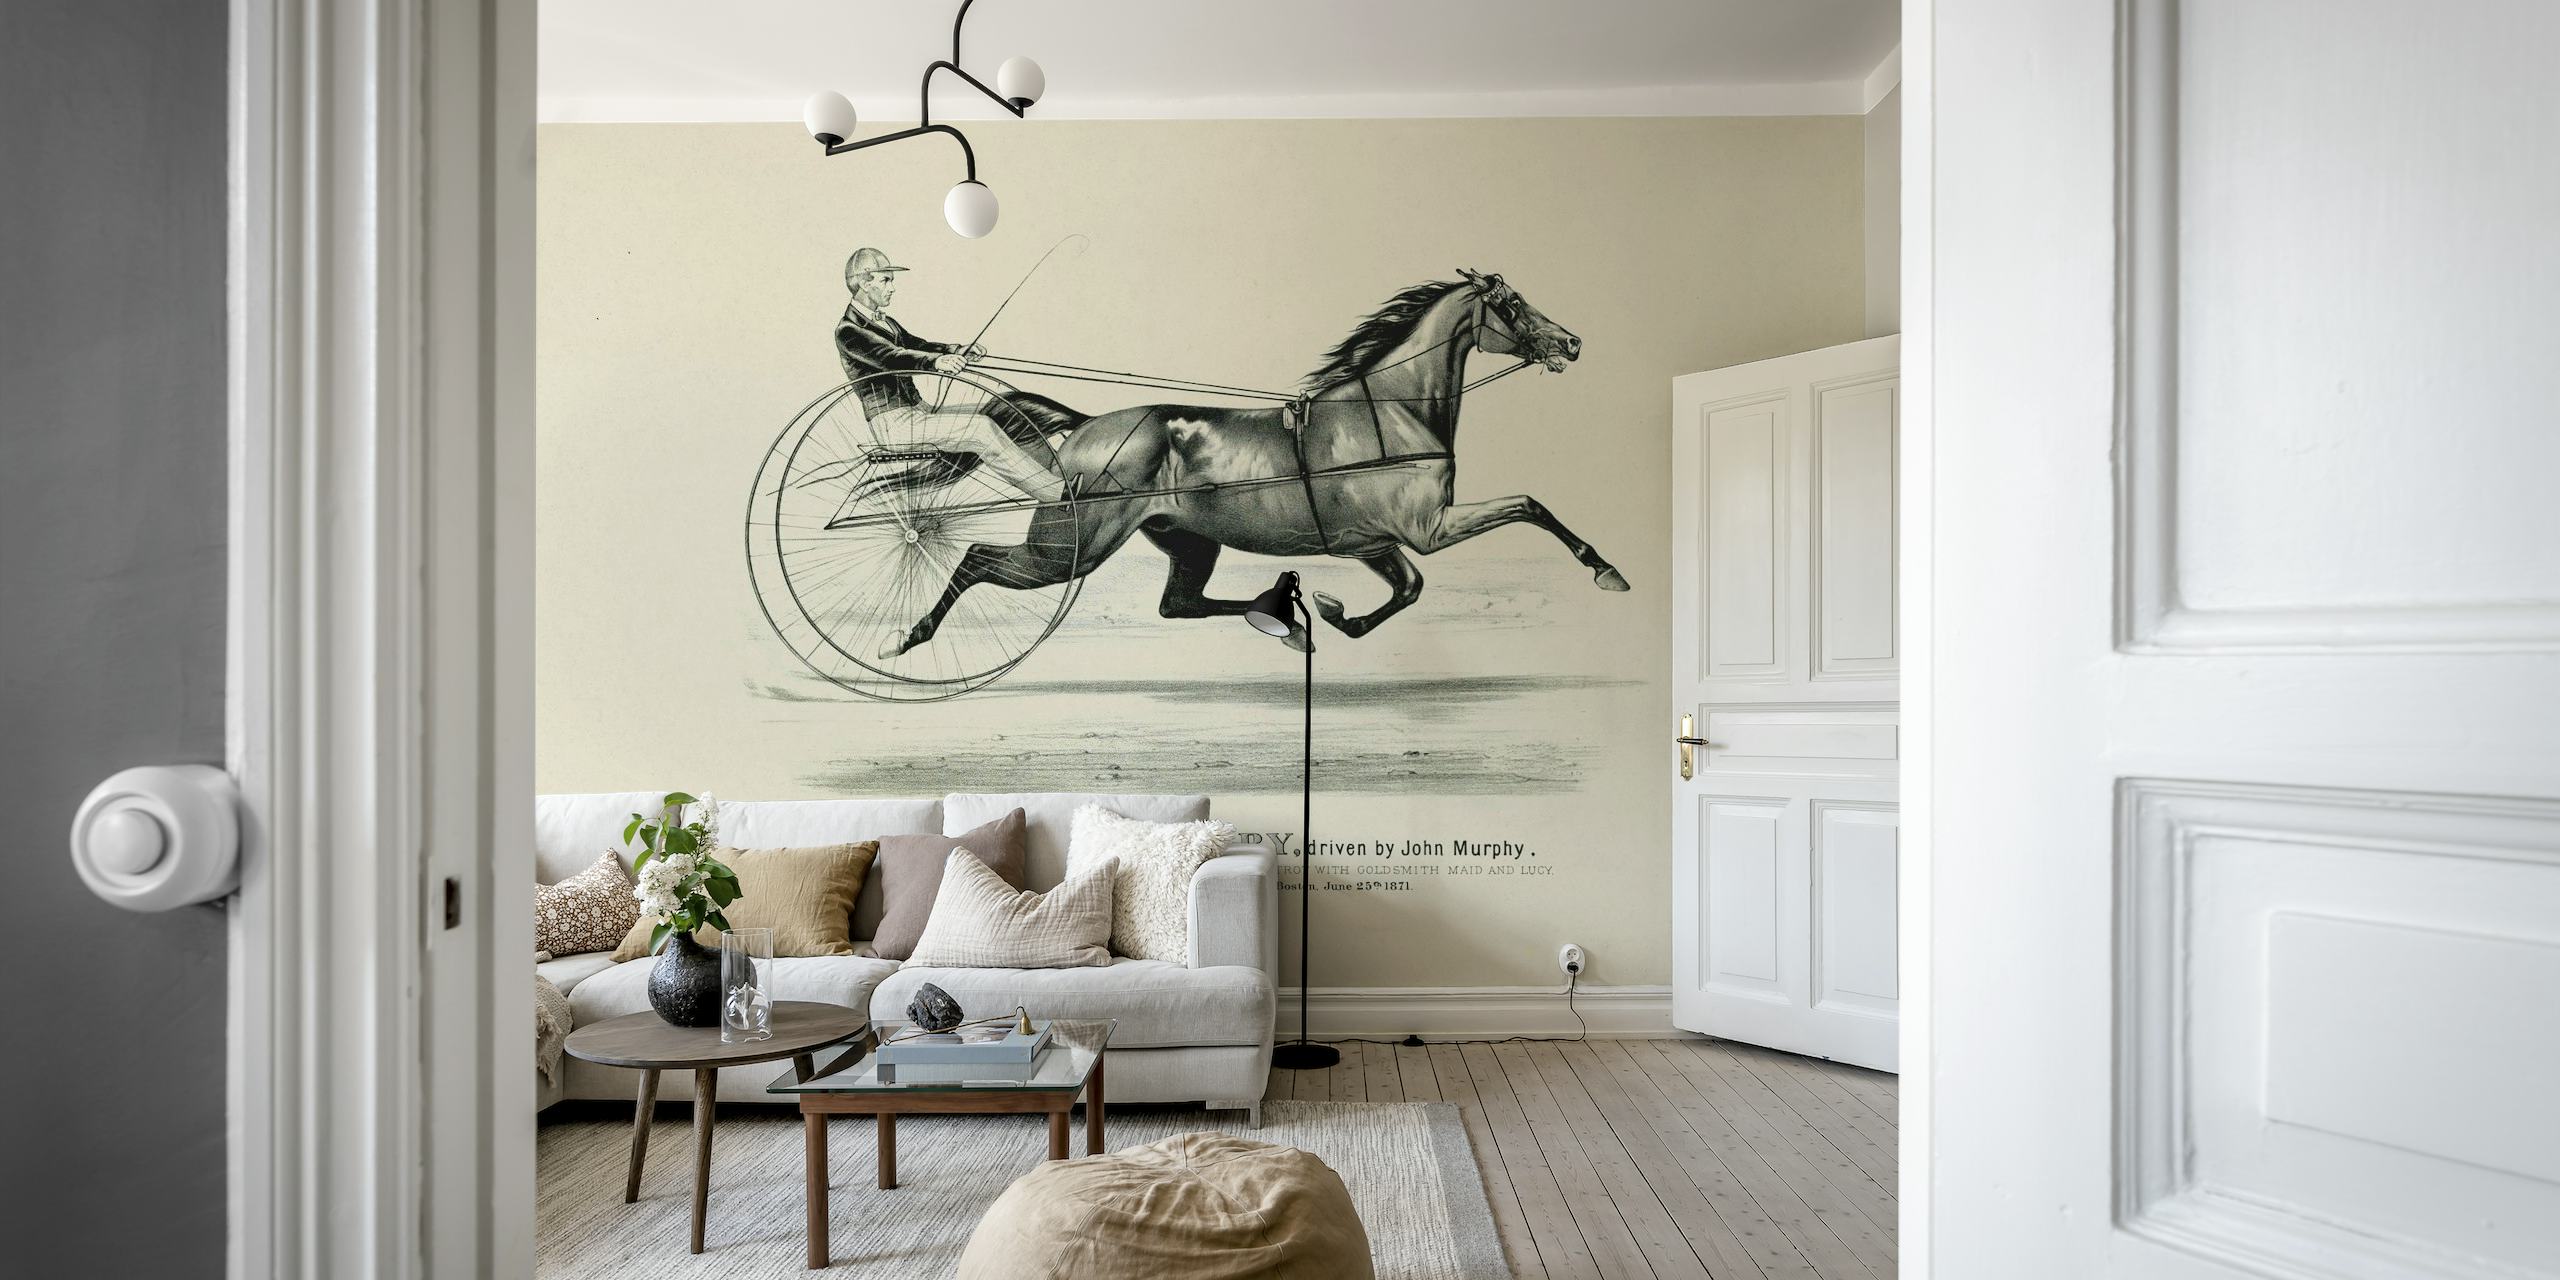 Historic horse riding art wall mural depicting a horse and rider in classical style.